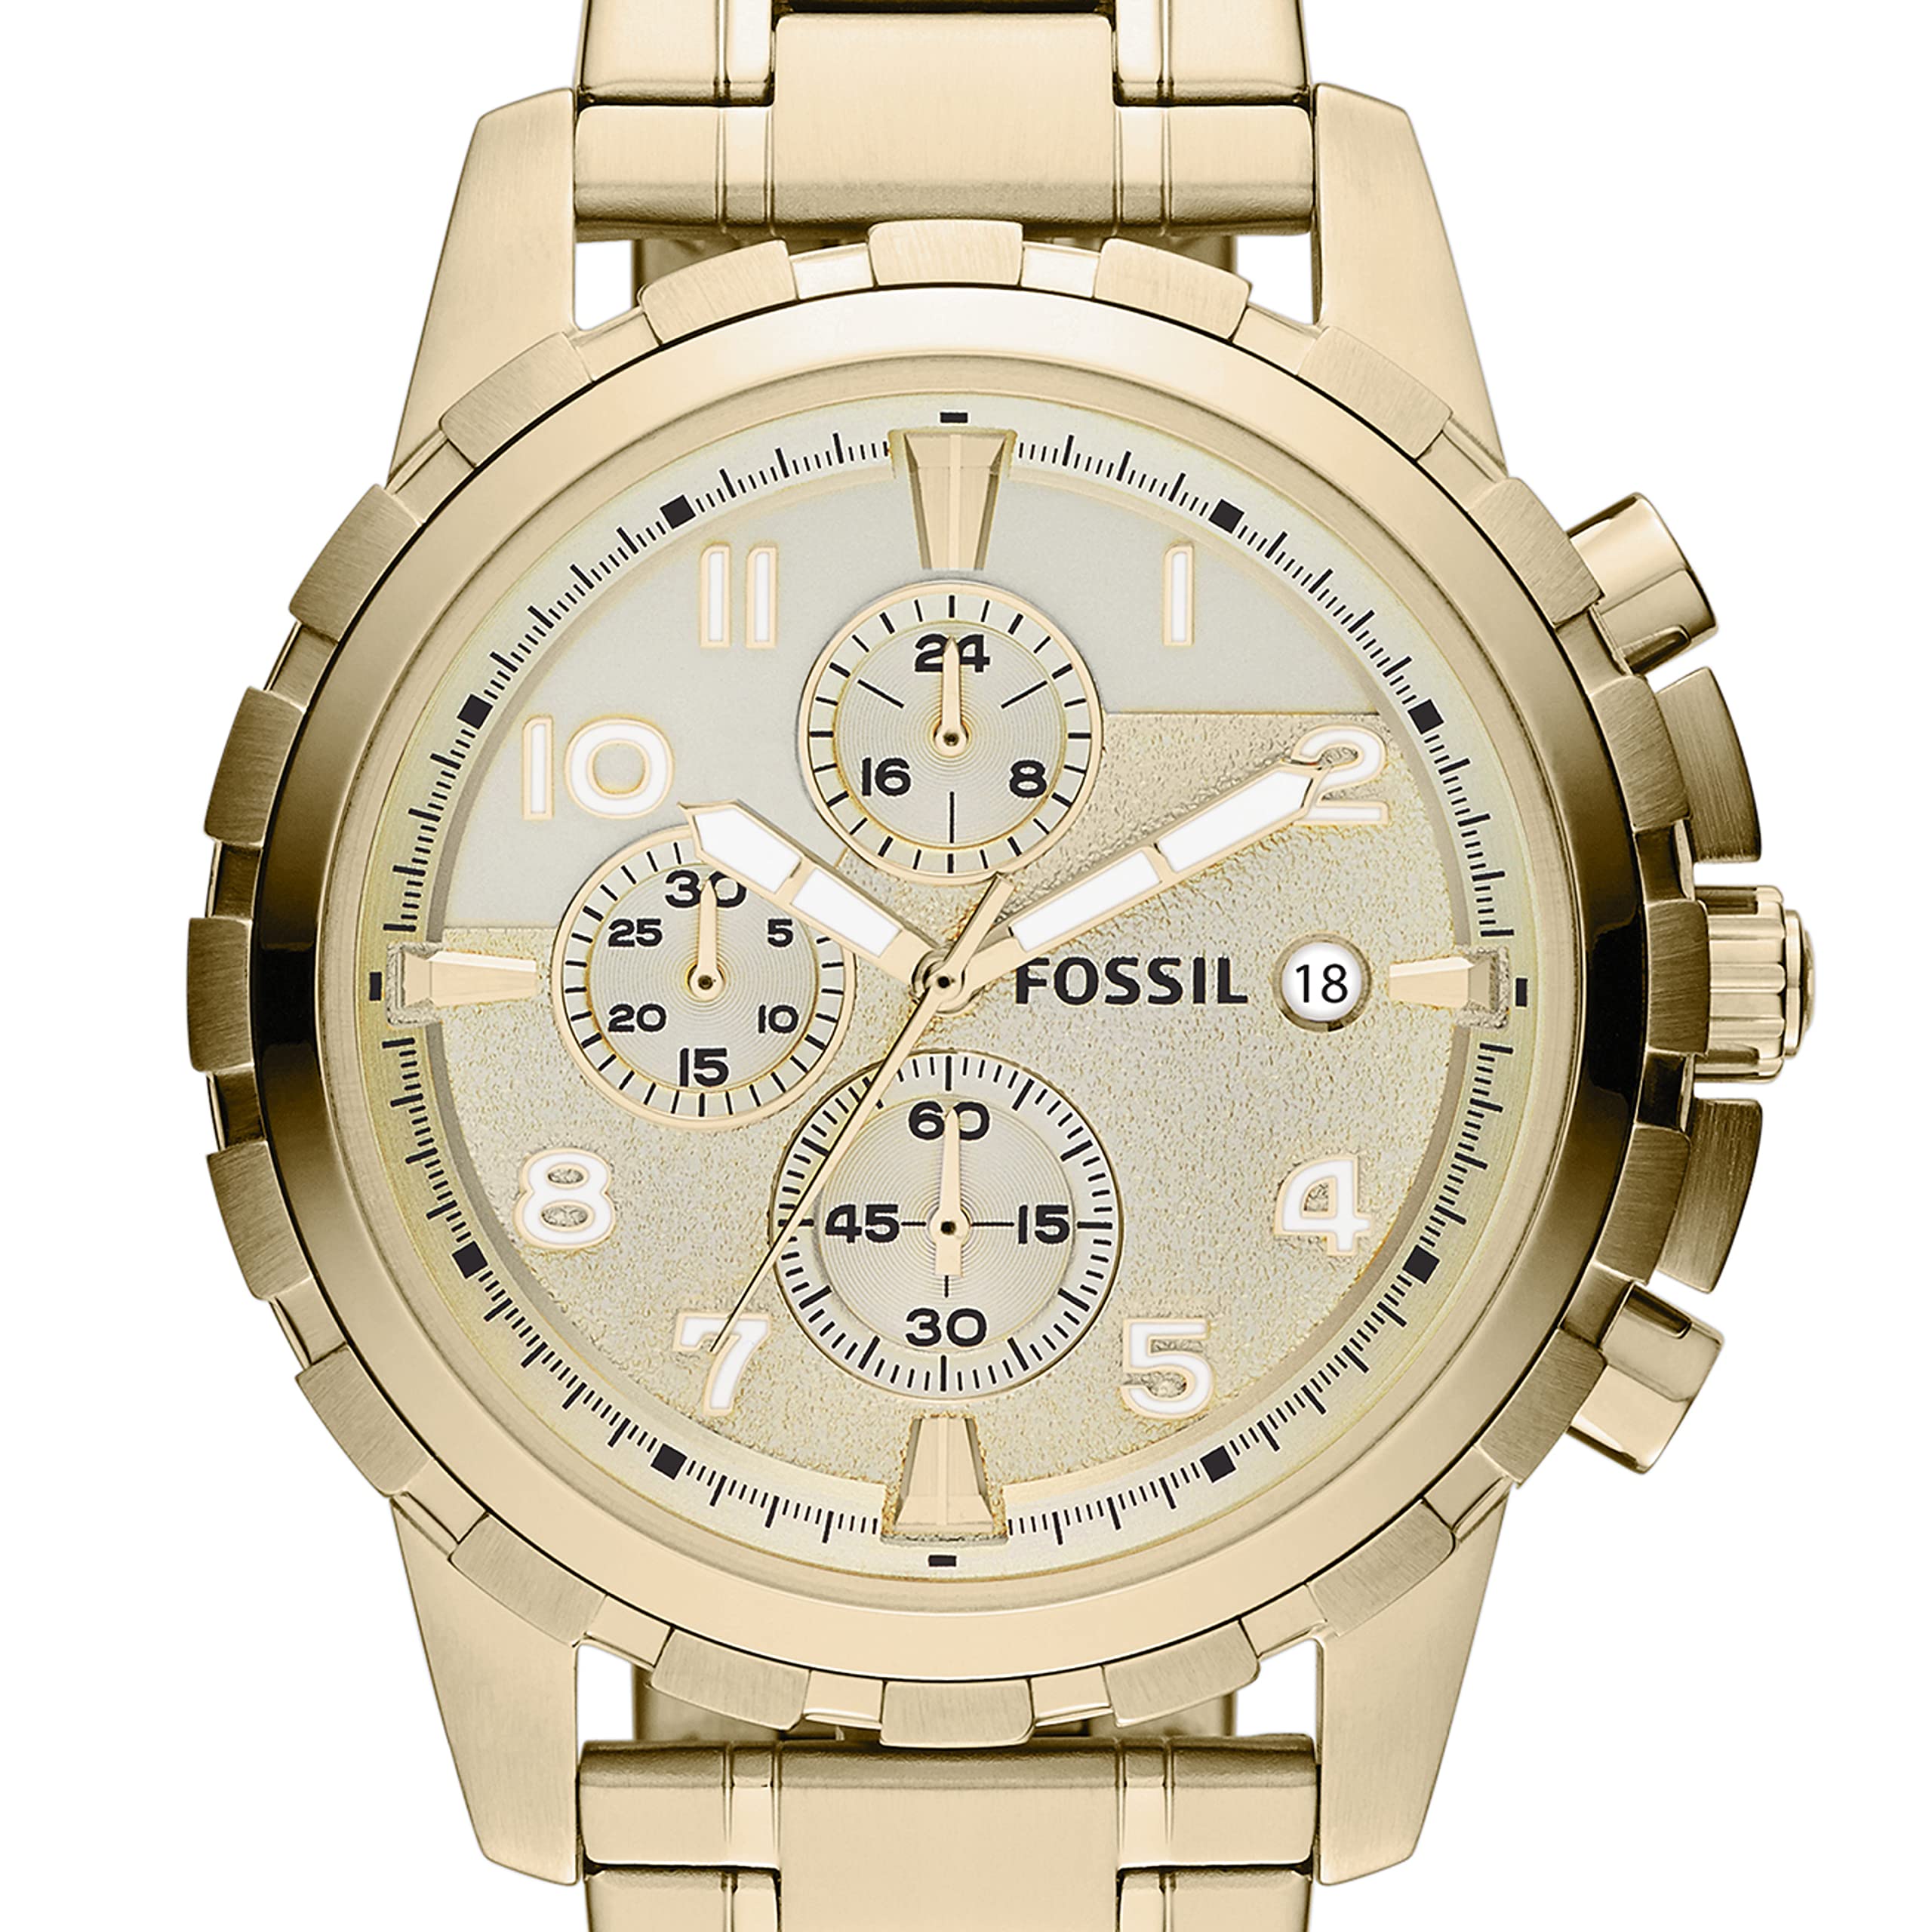 Fossil Men's Dean Stainless Steel Quartz Dress Chronograph Watch (Gold) $52 + Free Shipping